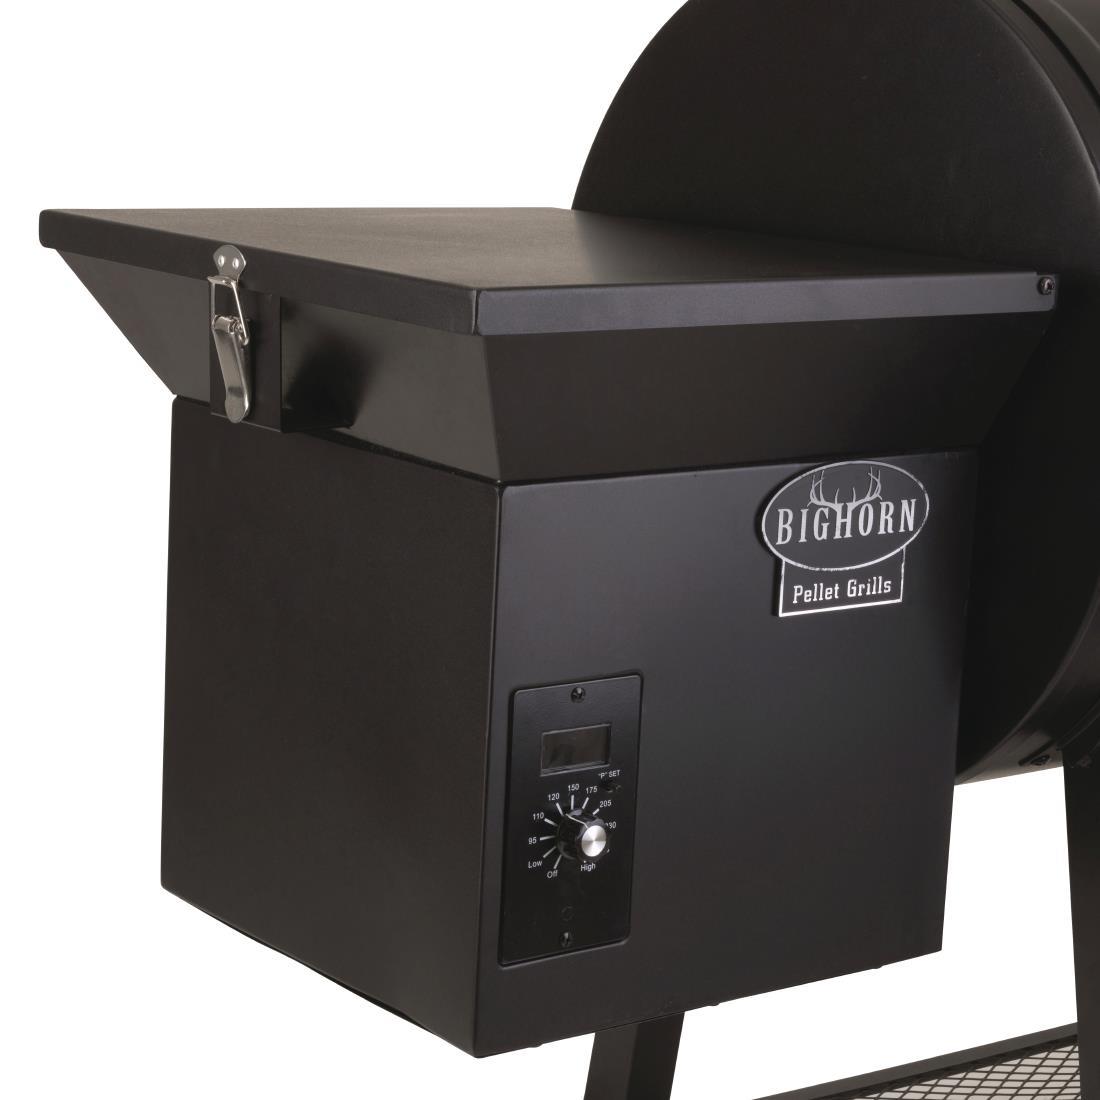 Lifestyle Big Horn Pellet BBQ Grill and Smoker - DB619  - 3